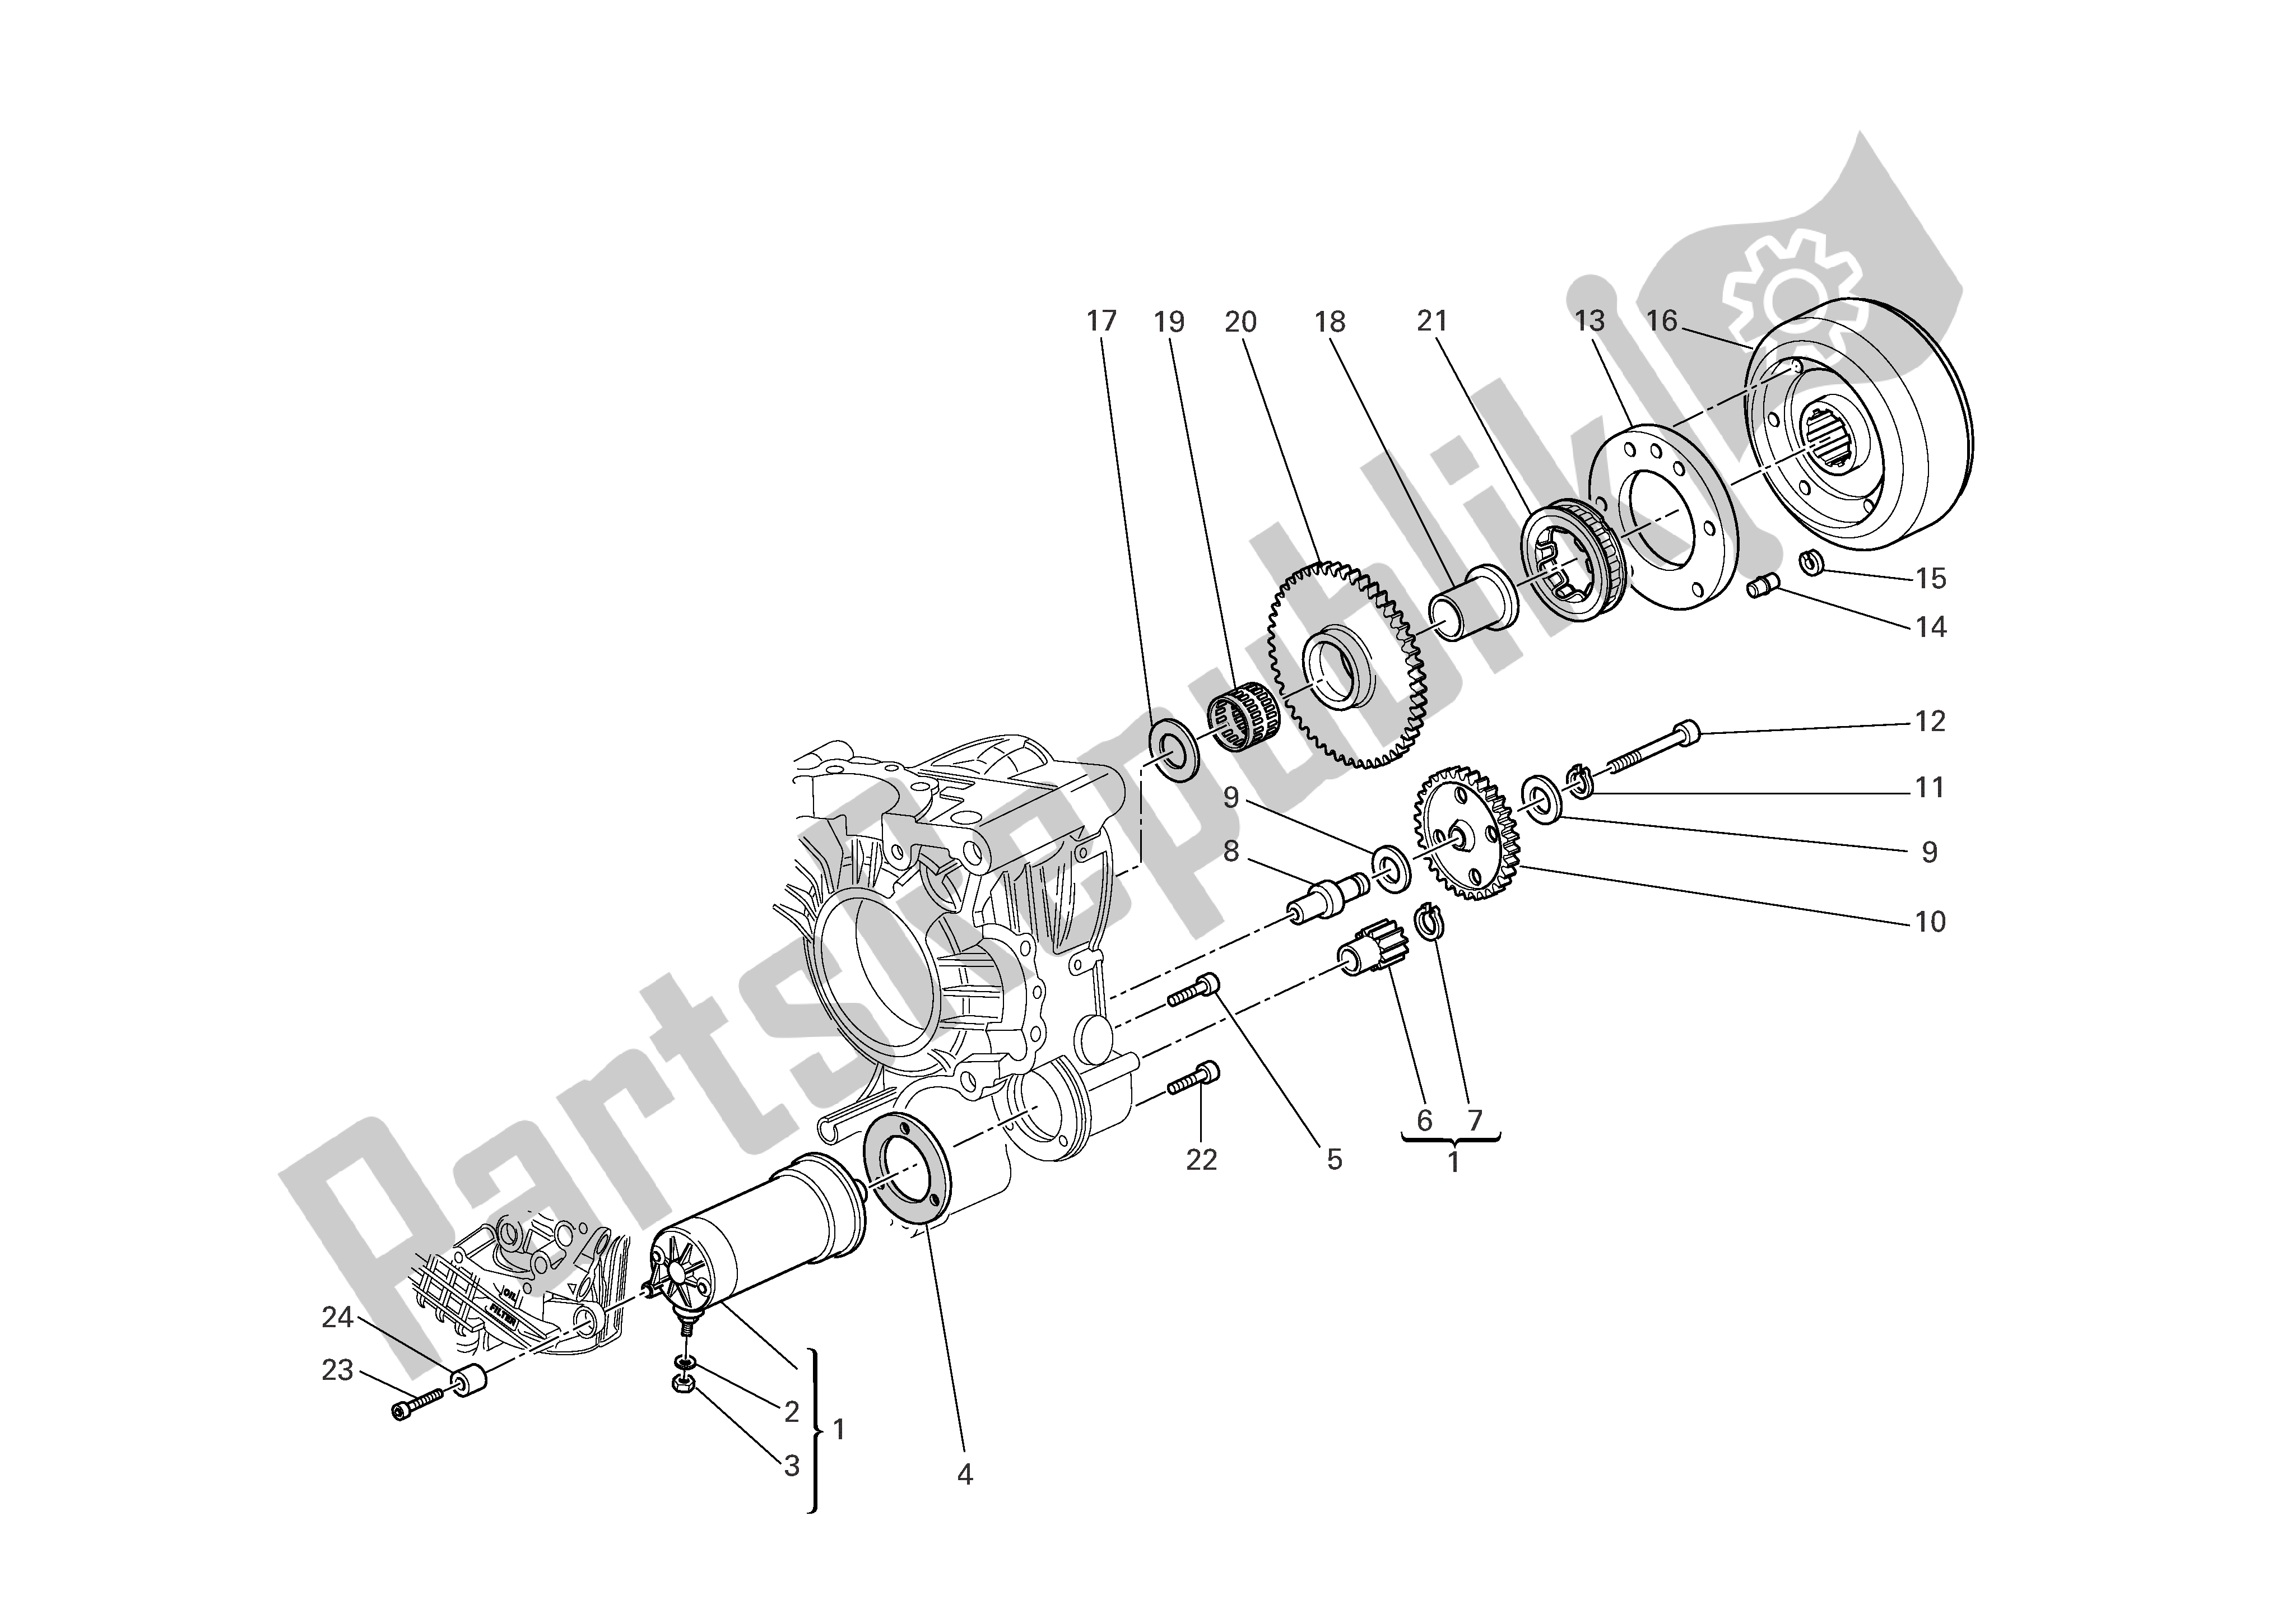 All parts for the Electric Starting And Ignition of the Ducati Multistrada 1000 2005